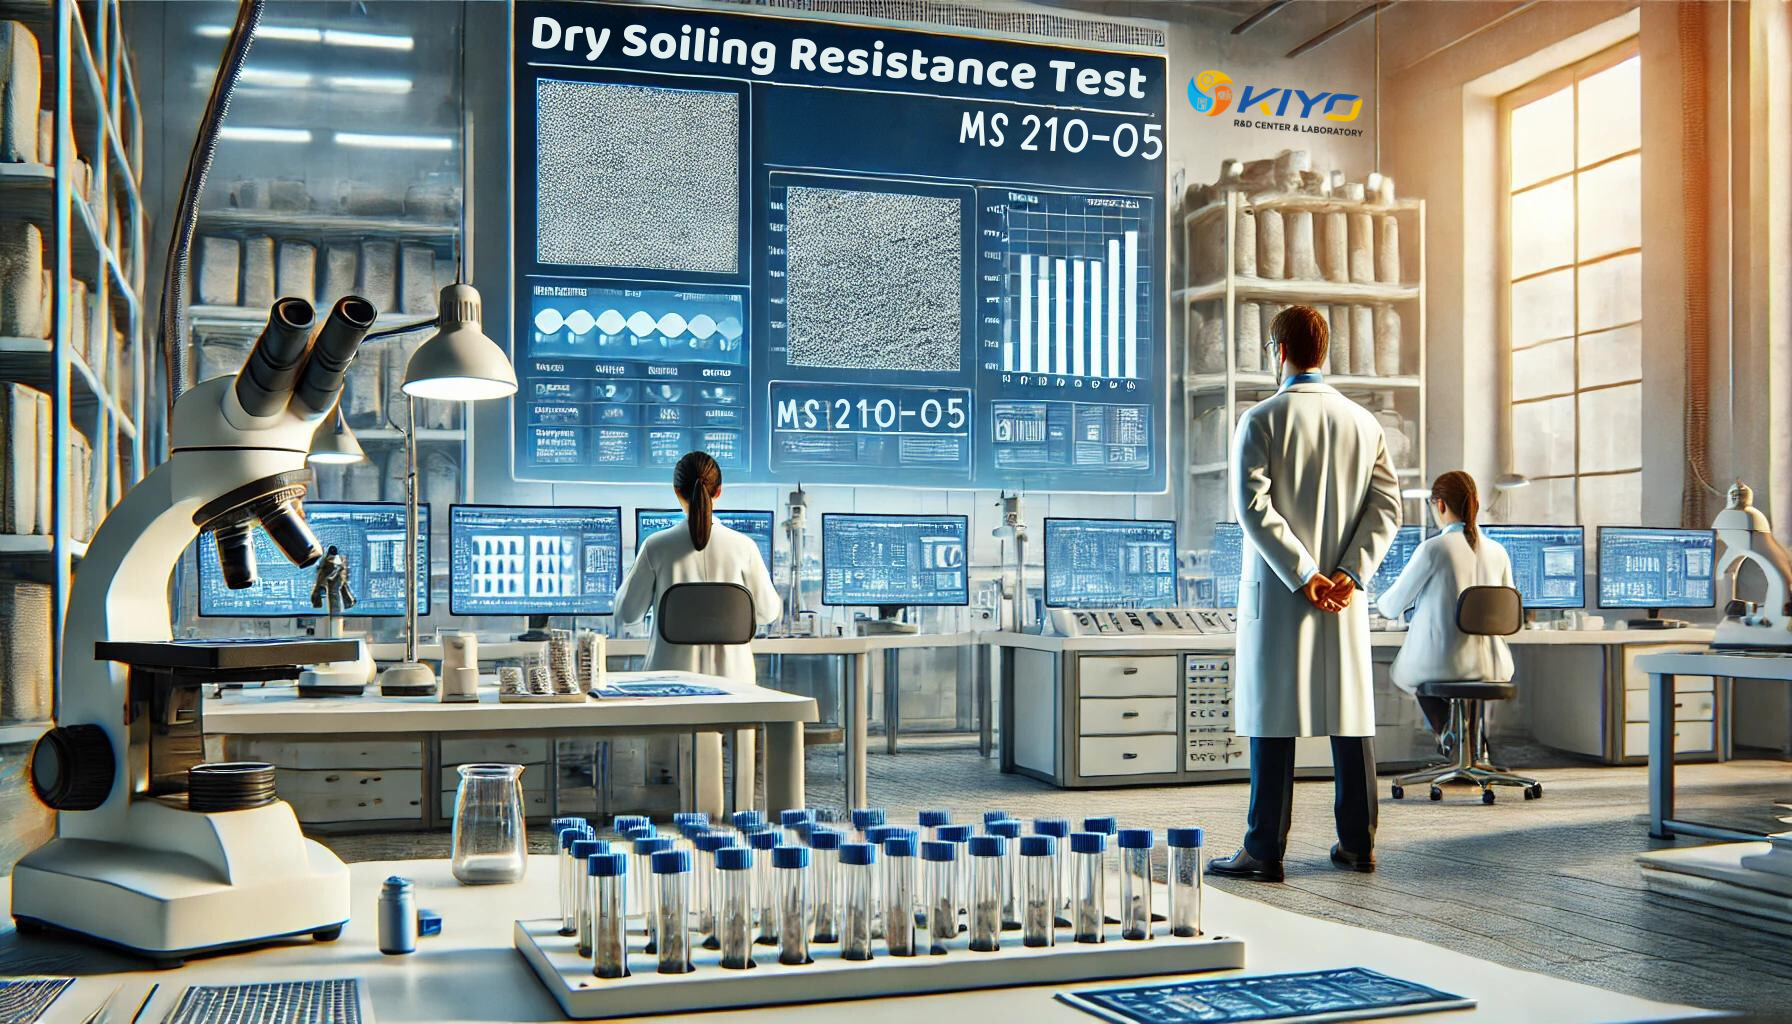 Dry Soiling Resistance Test as Per MS 210-05